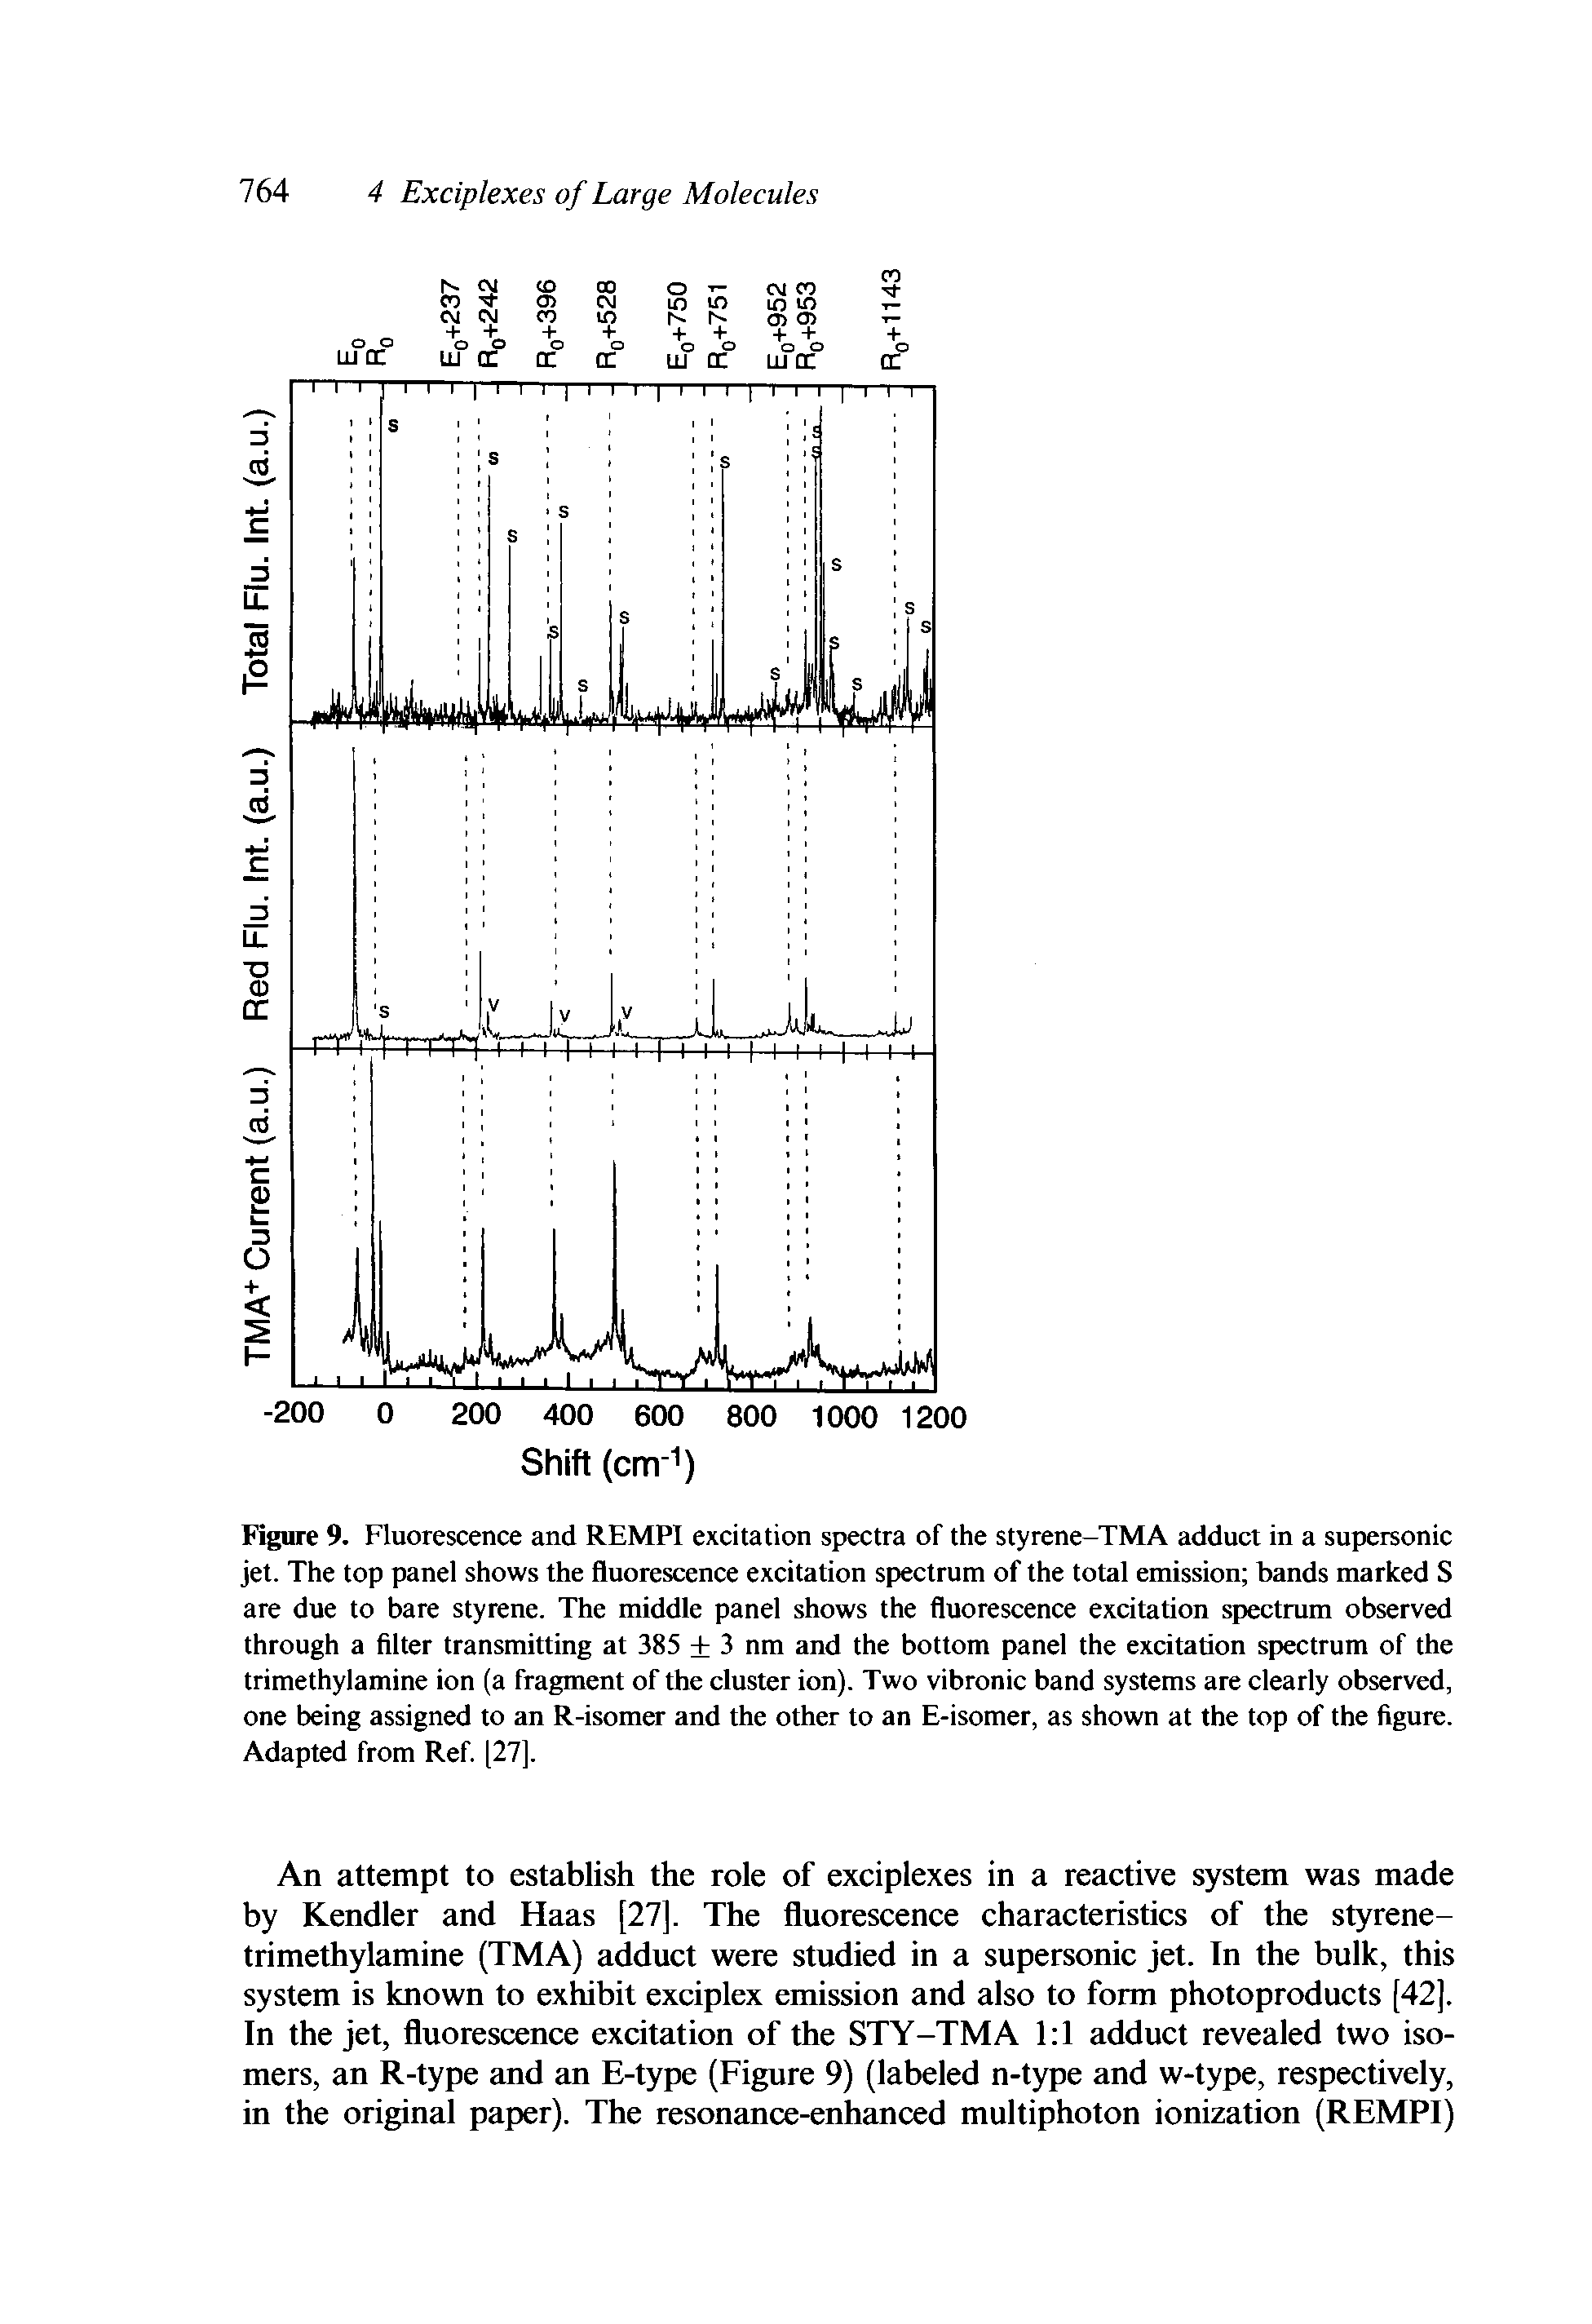 Figure 9. Fluorescence and REMPl excitation spectra of the styrene-TMA adduct in a supersonic jet. The top panel shows the fluorescence excitation spectrum of the total emission bands marked S are due to bare styrene. The middle panel shows the fluorescence excitation spectrum observed through a filter transmitting at 385 + 3 nm and the bottom panel the excitation spectrum of the trimethylamine ion (a fragment of the cluster ion). Two vibronic band systems are clearly observed, one being assigned to an R-isomer and the other to an E-isomer, as shown at the top of the figure. Adapted from Ref. [27].